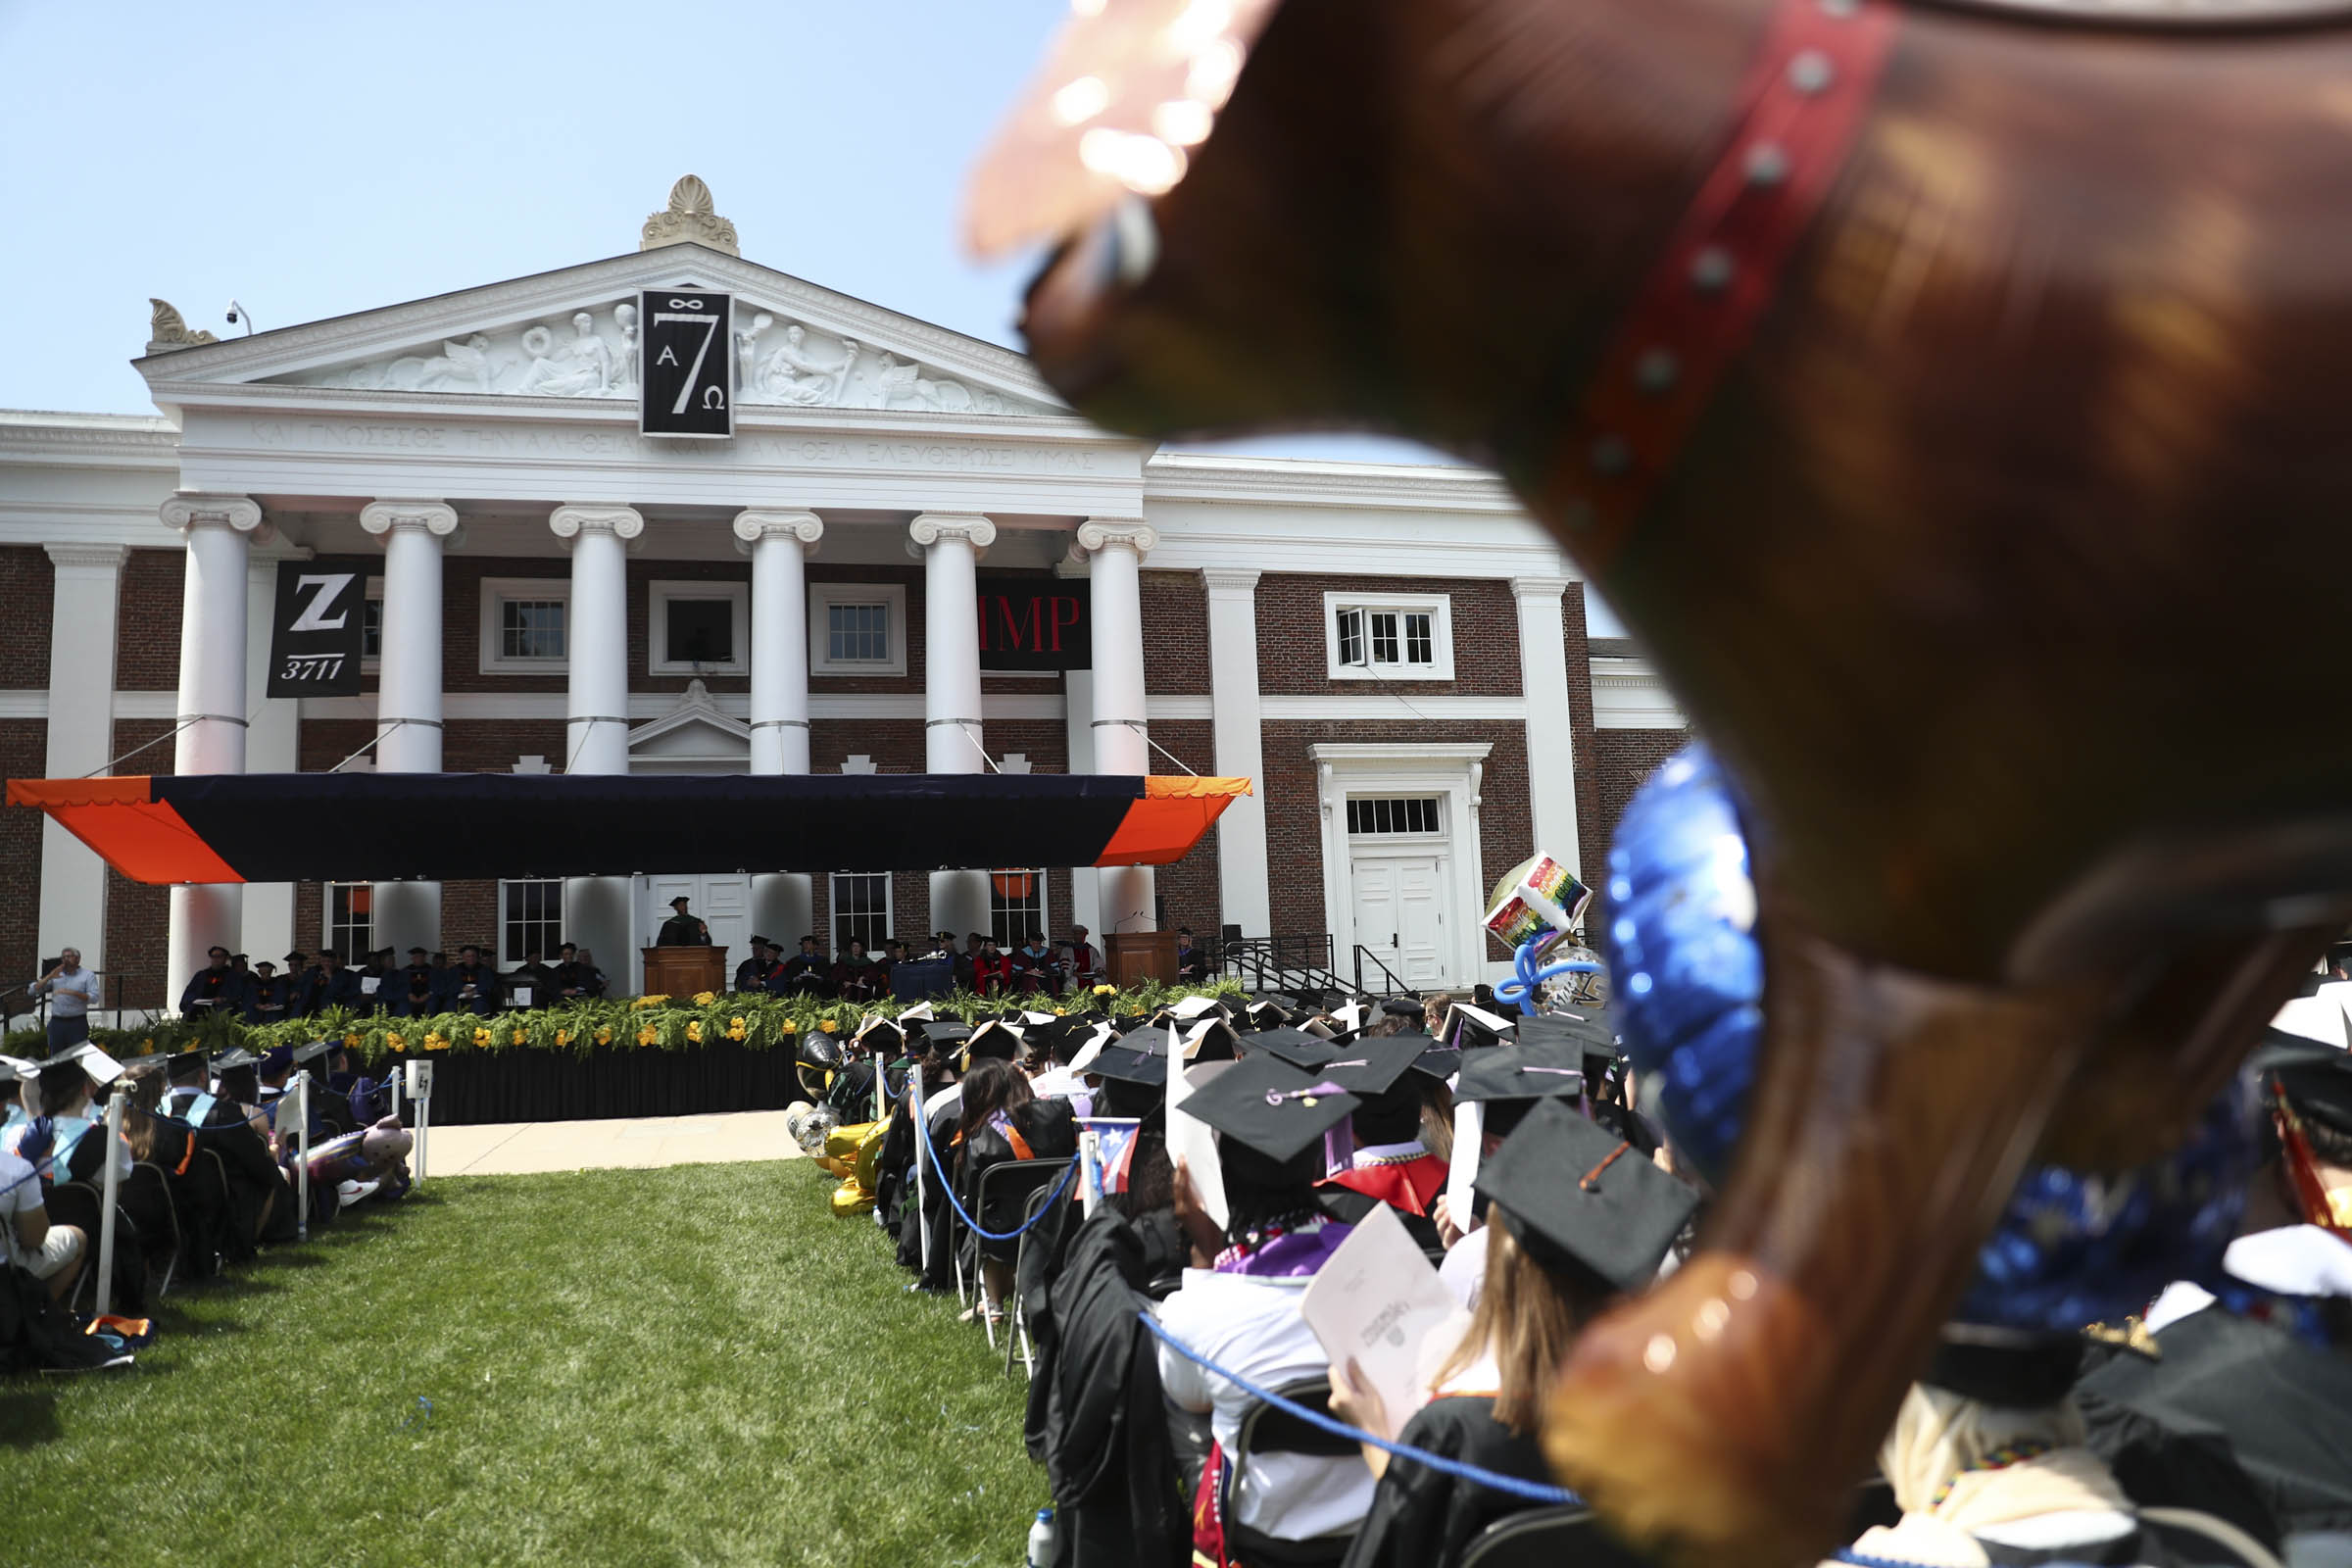 From behind a balloon shaped like a cow, the graduates listen intently to the speaker